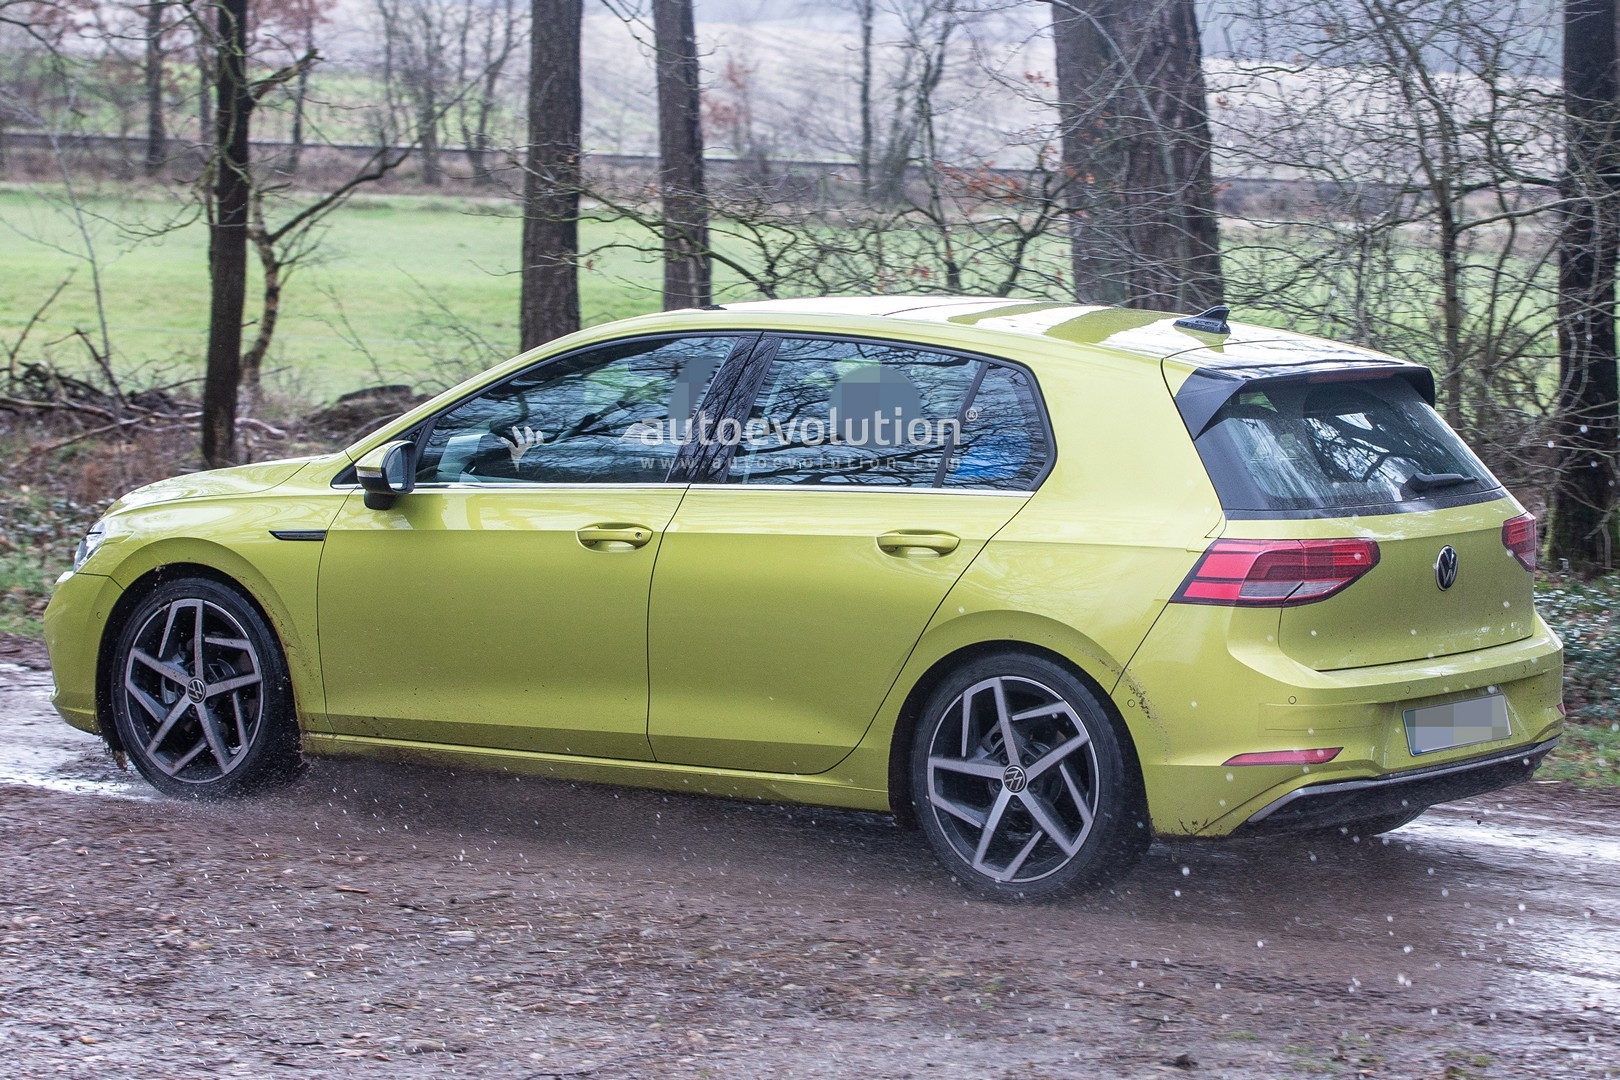 Golf 8 Going On Sale In February 2020, VW Currently Fixing the Buggy